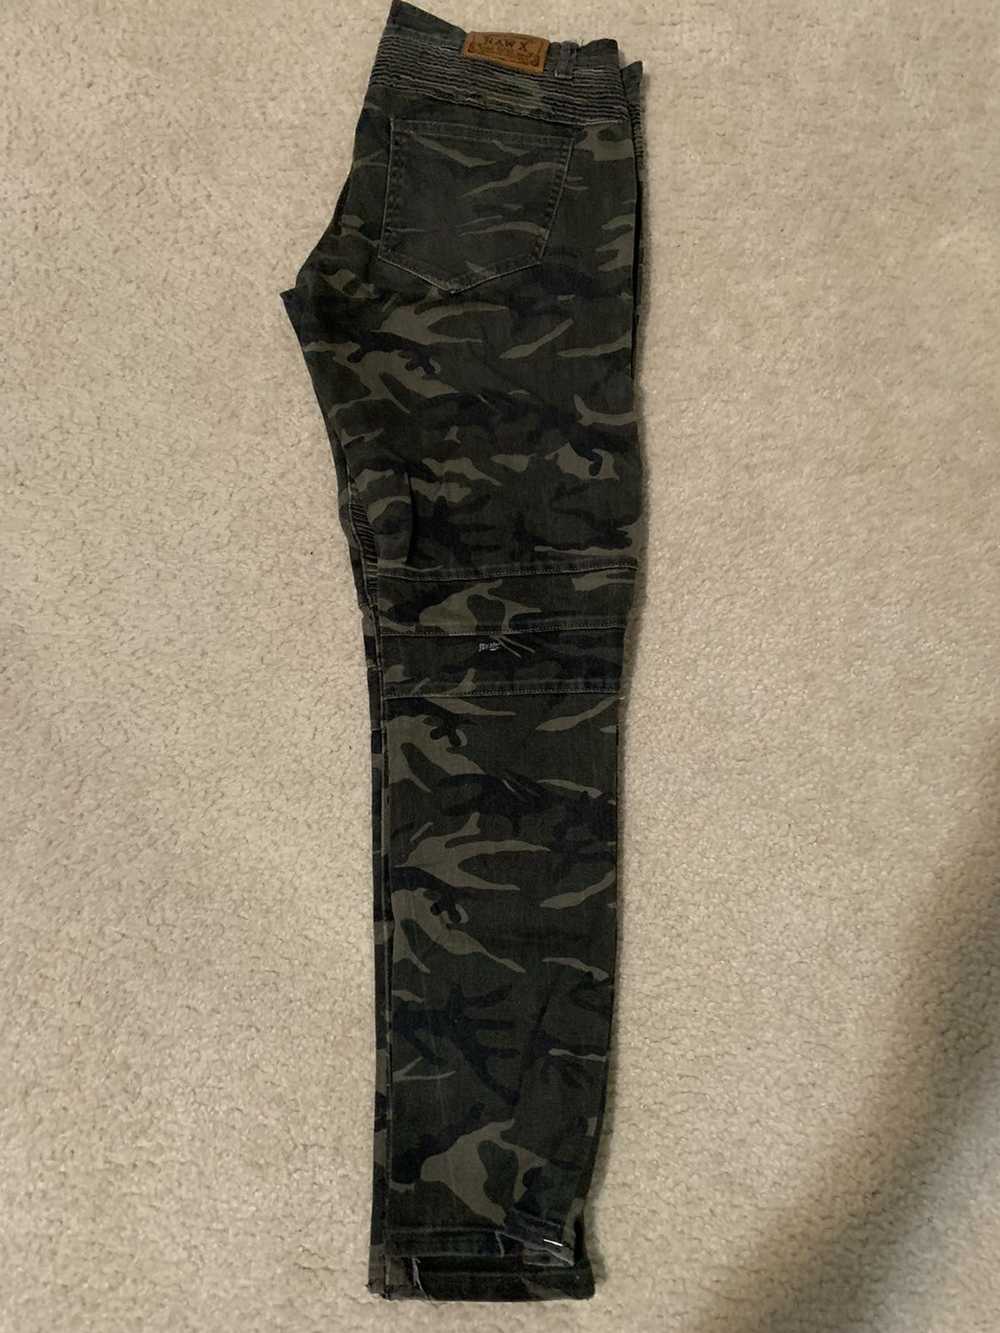 Other Raw X camo jeans - image 1